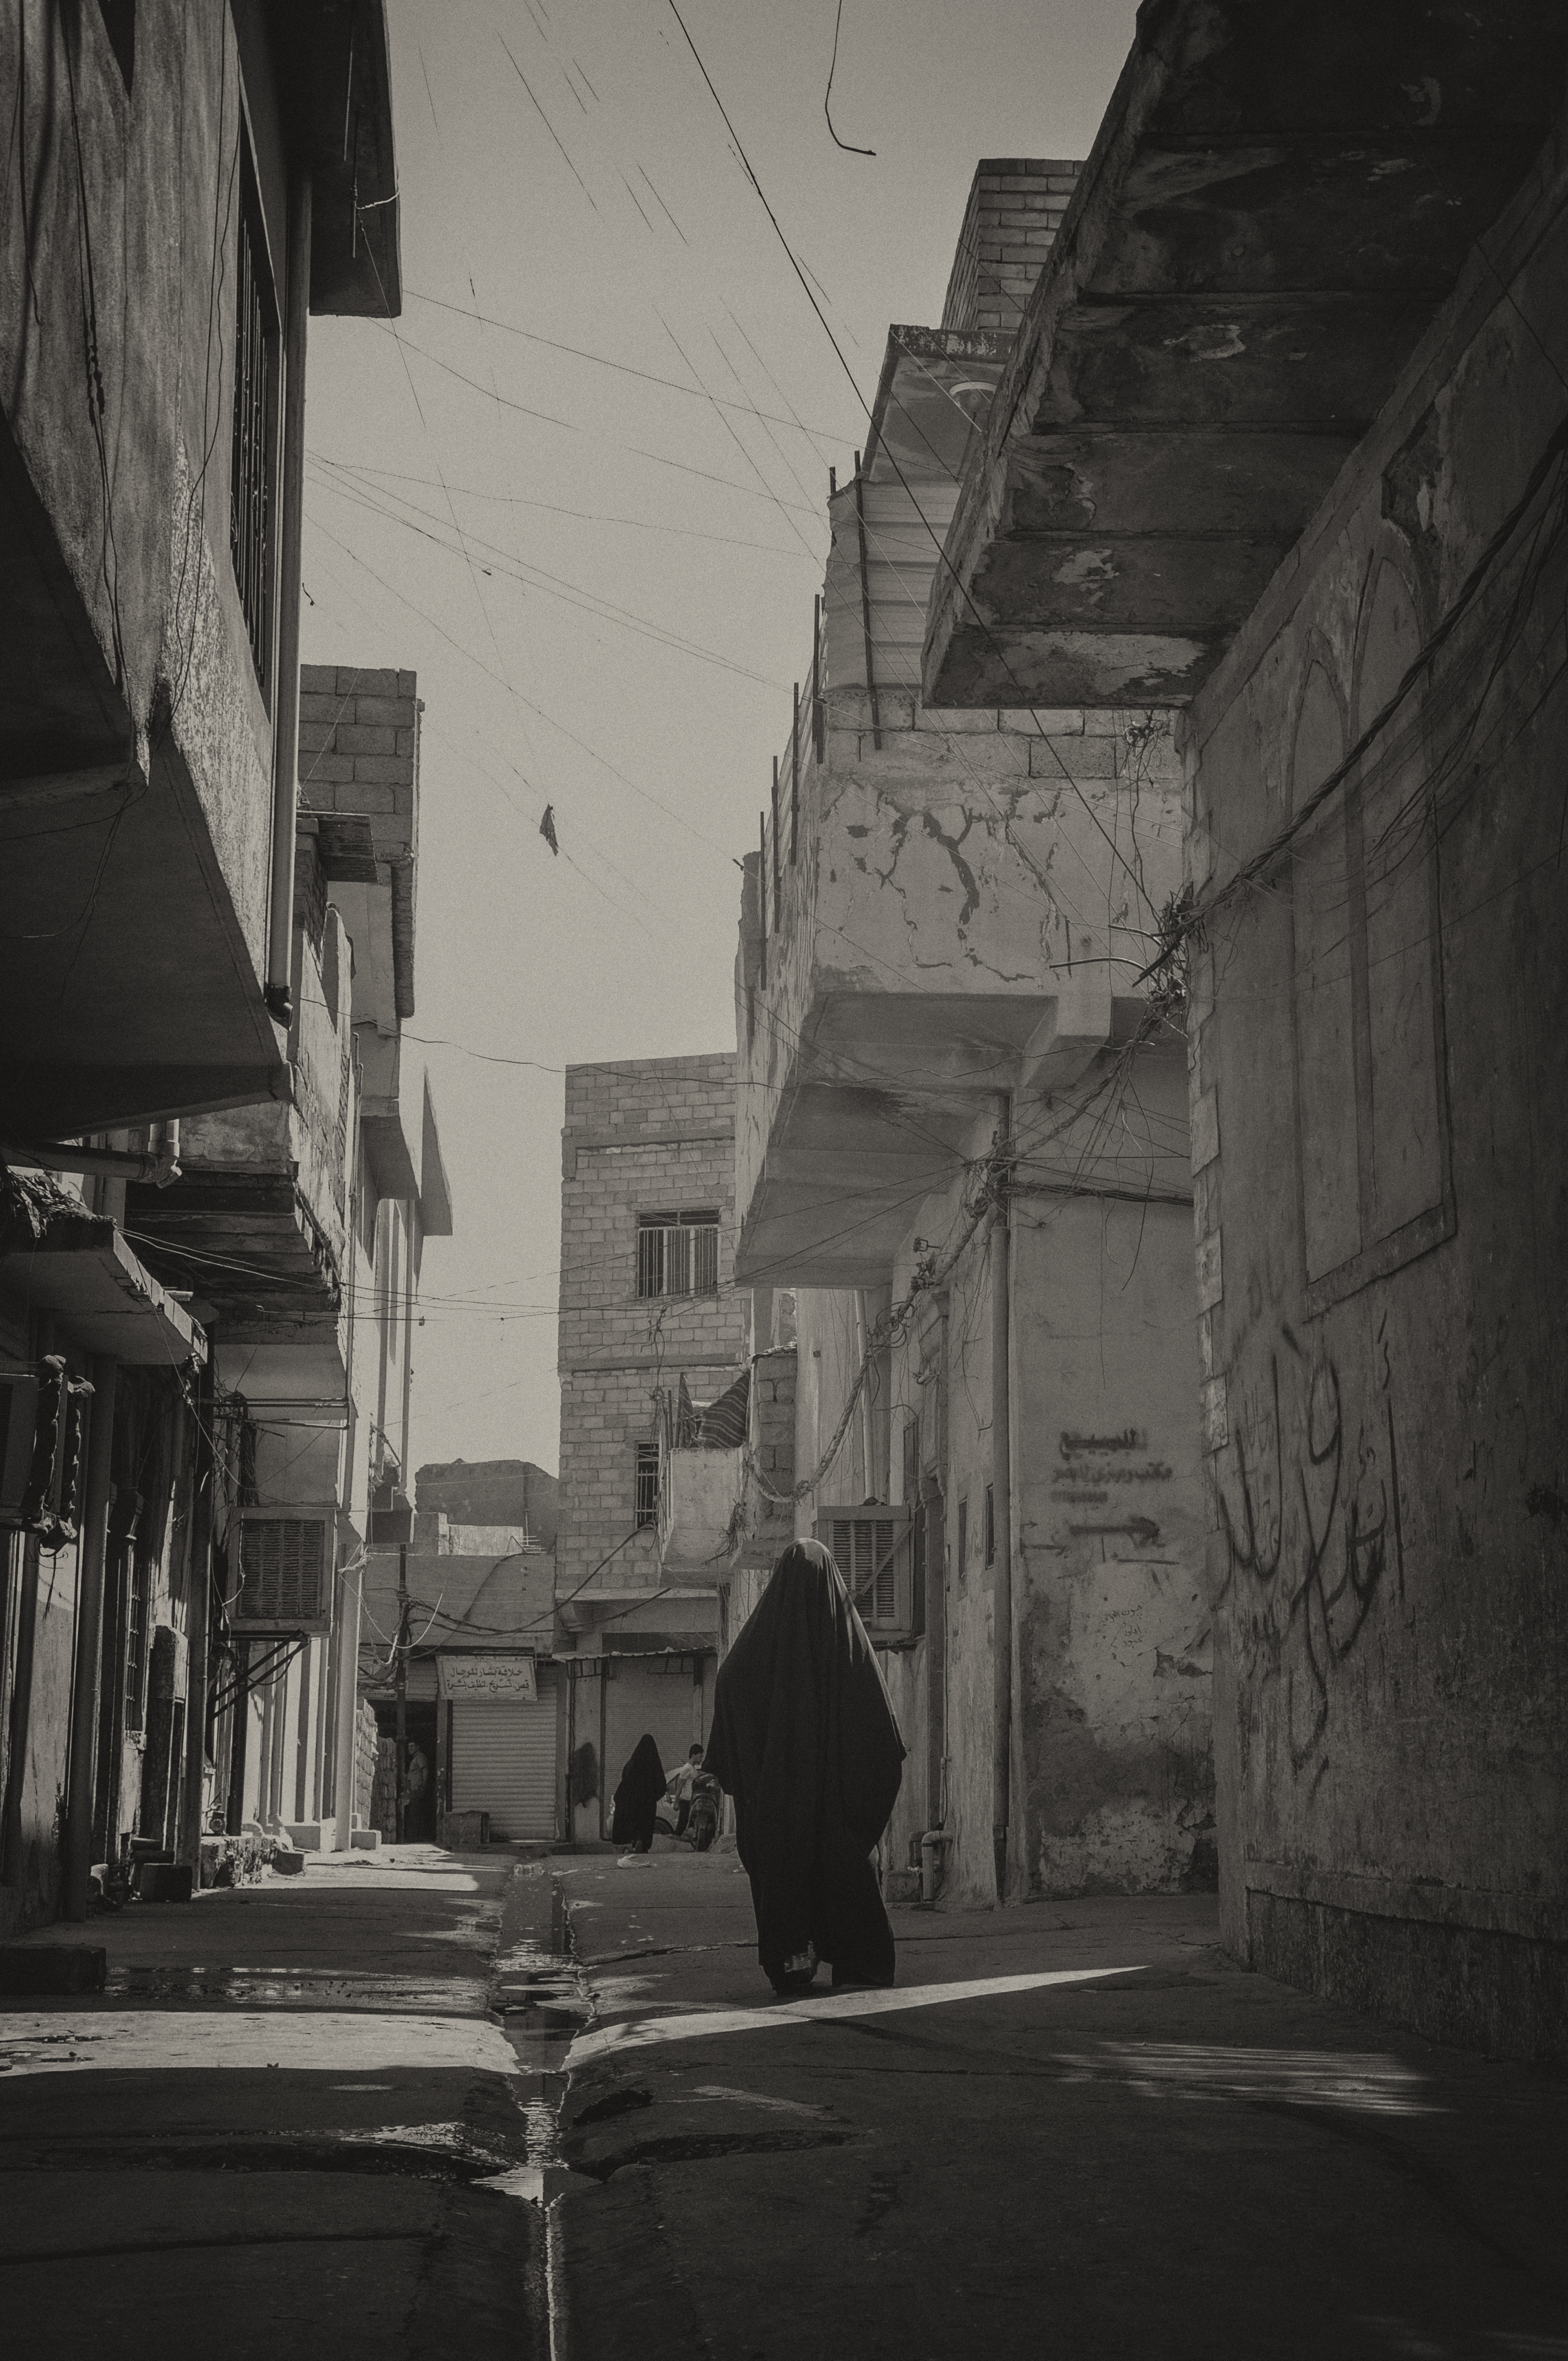 In the streets of Mosul, Iraq, in 2013. Photo by: Zaid Alobayde. Photo.